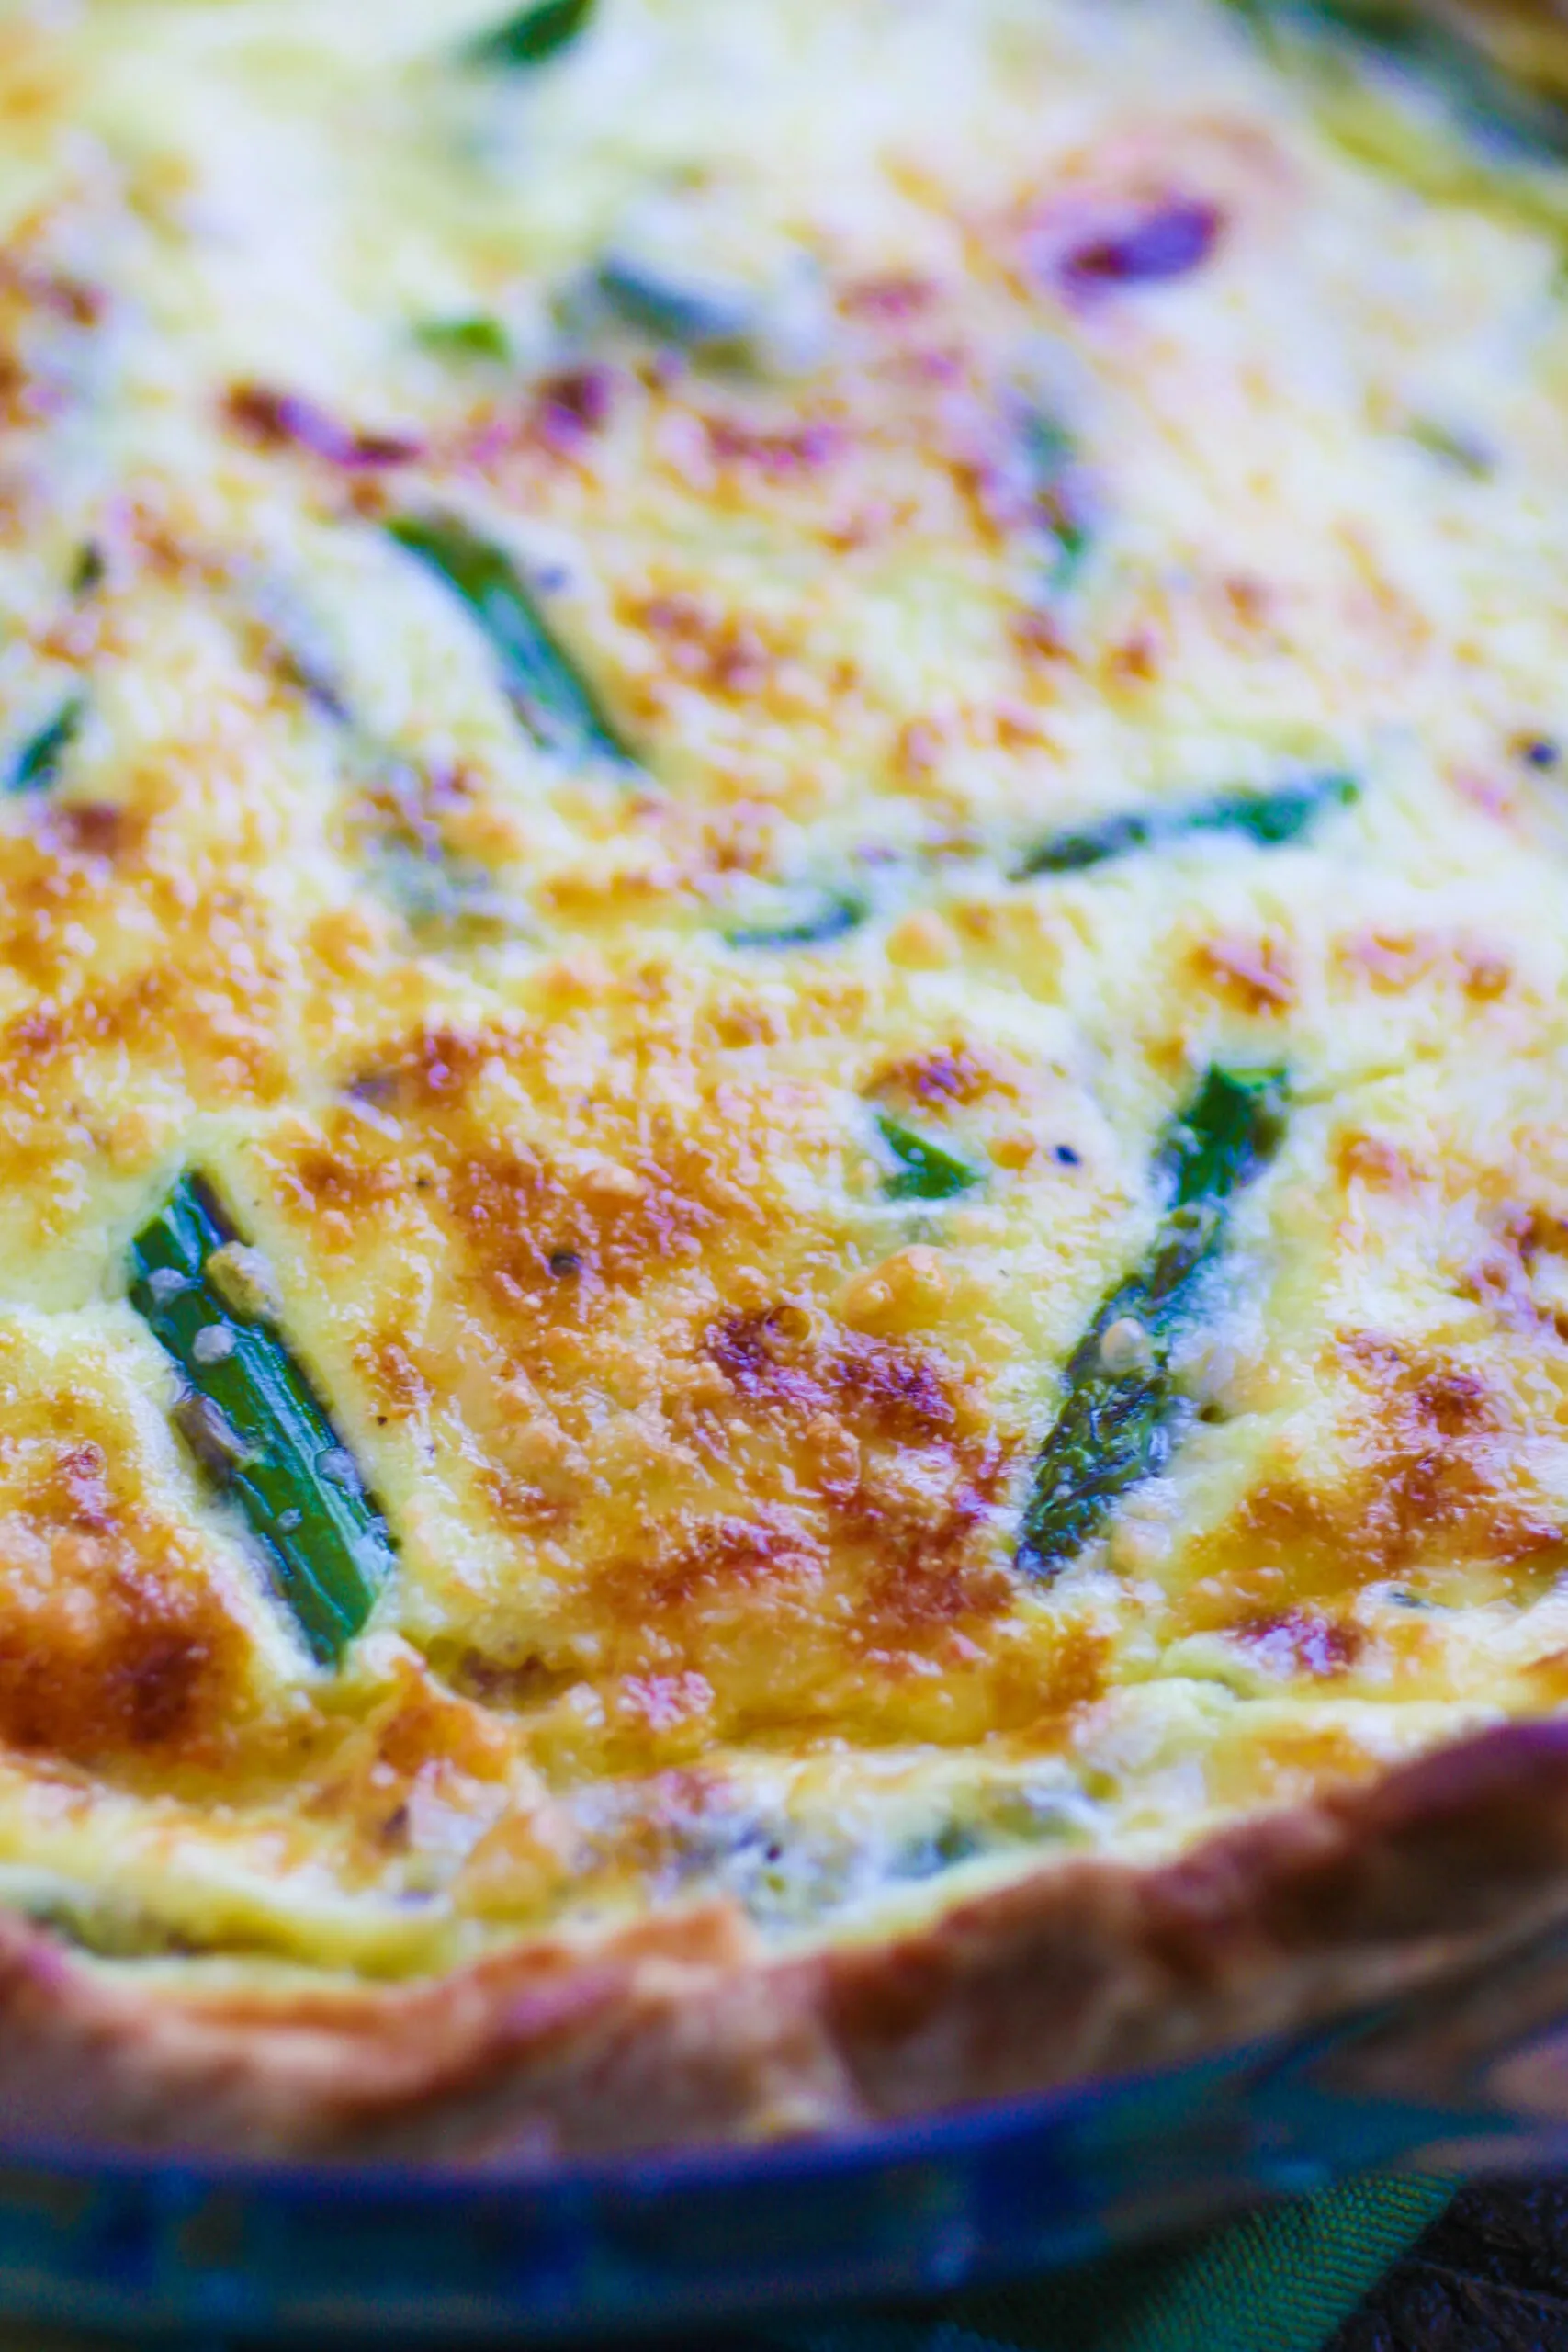 Asparagus and Pancetta Quiche is golden on top thanks to the rich Swiss cheese added to the mix.